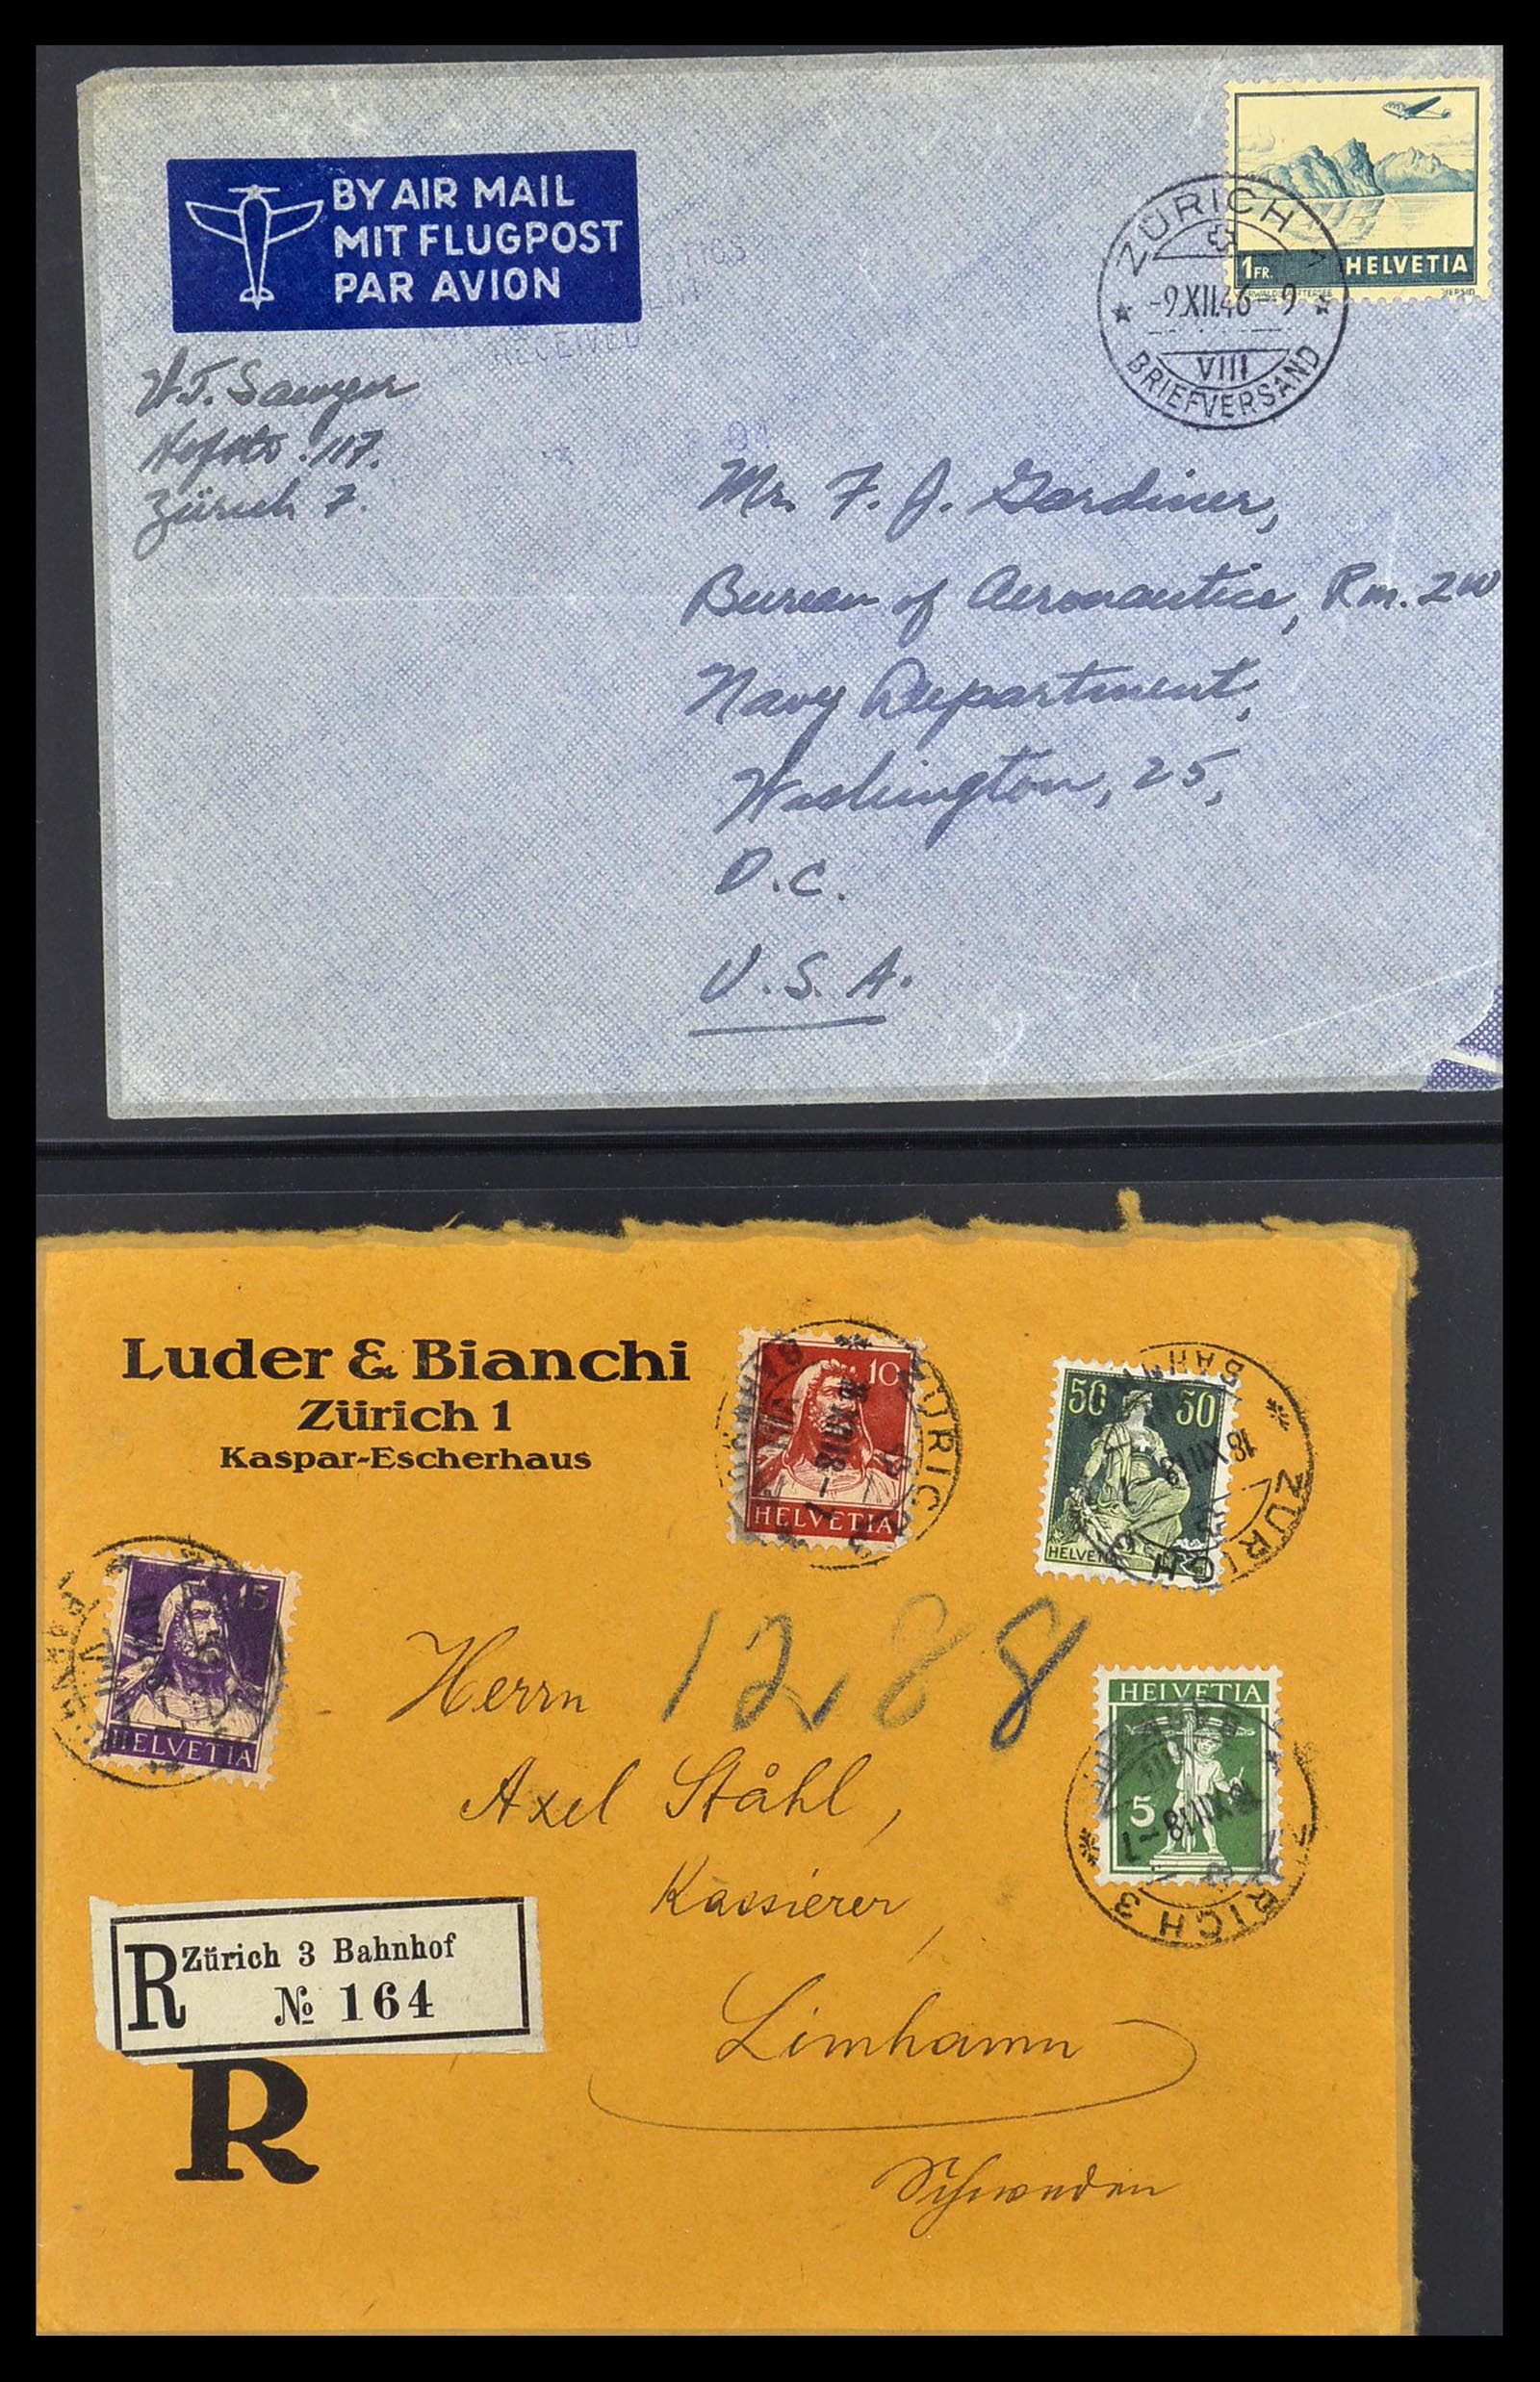 34137 142 - Stamp collection 34137 Switzerland airmail covers 1923-1963.